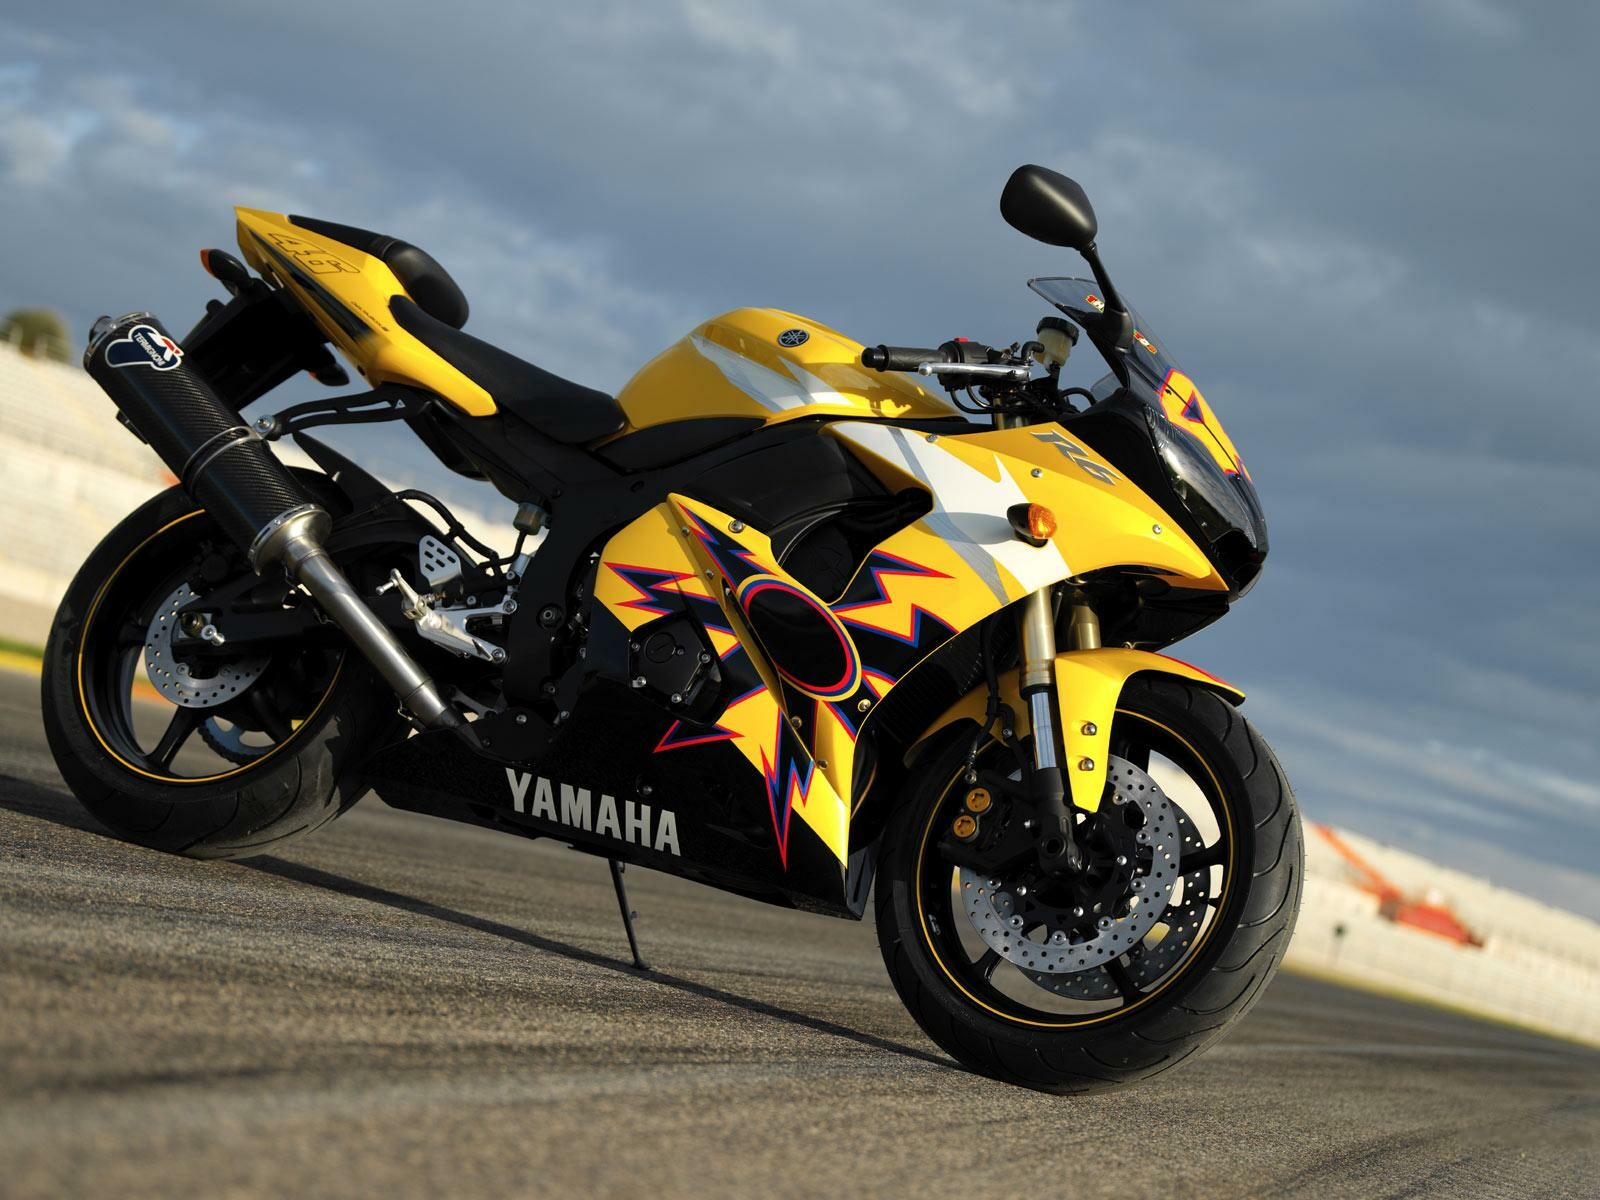 59+ Yamaha Wallpapers: HD, 4K, 5K for PC and Mobile | Download free